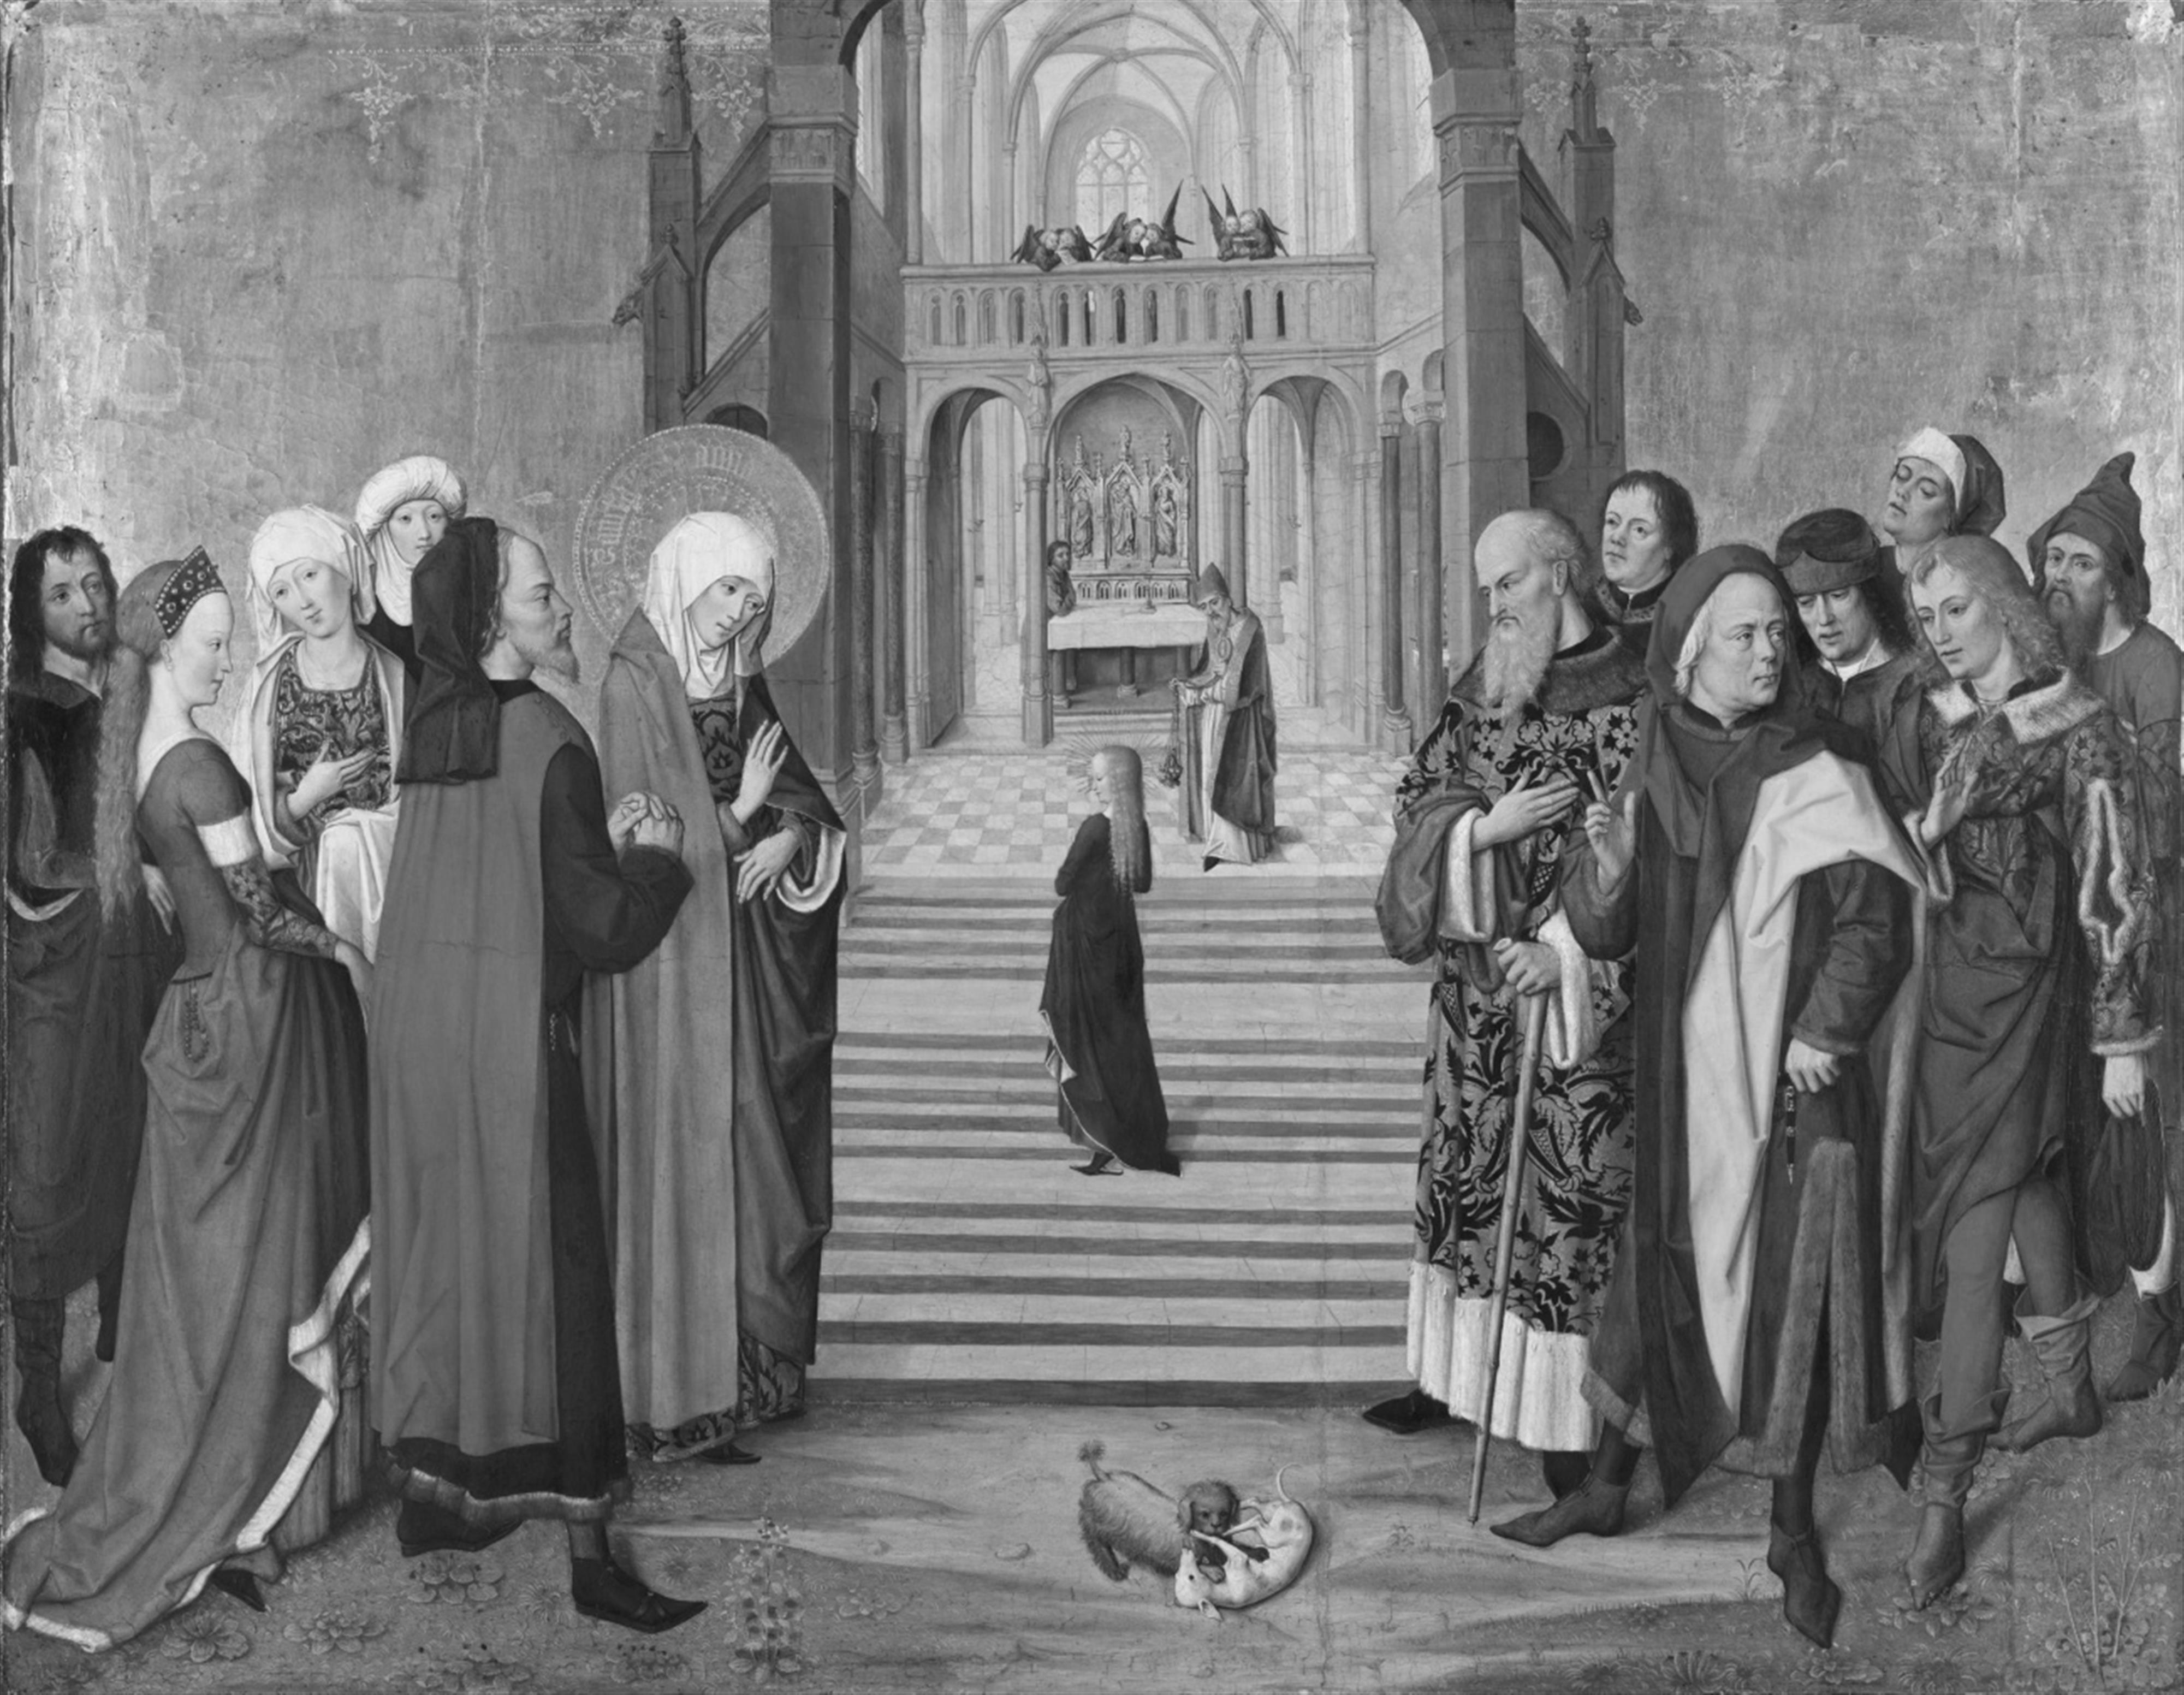 Cologne School circa 1500 - The Presentation of the Virgin Mary at the Temple - image-3